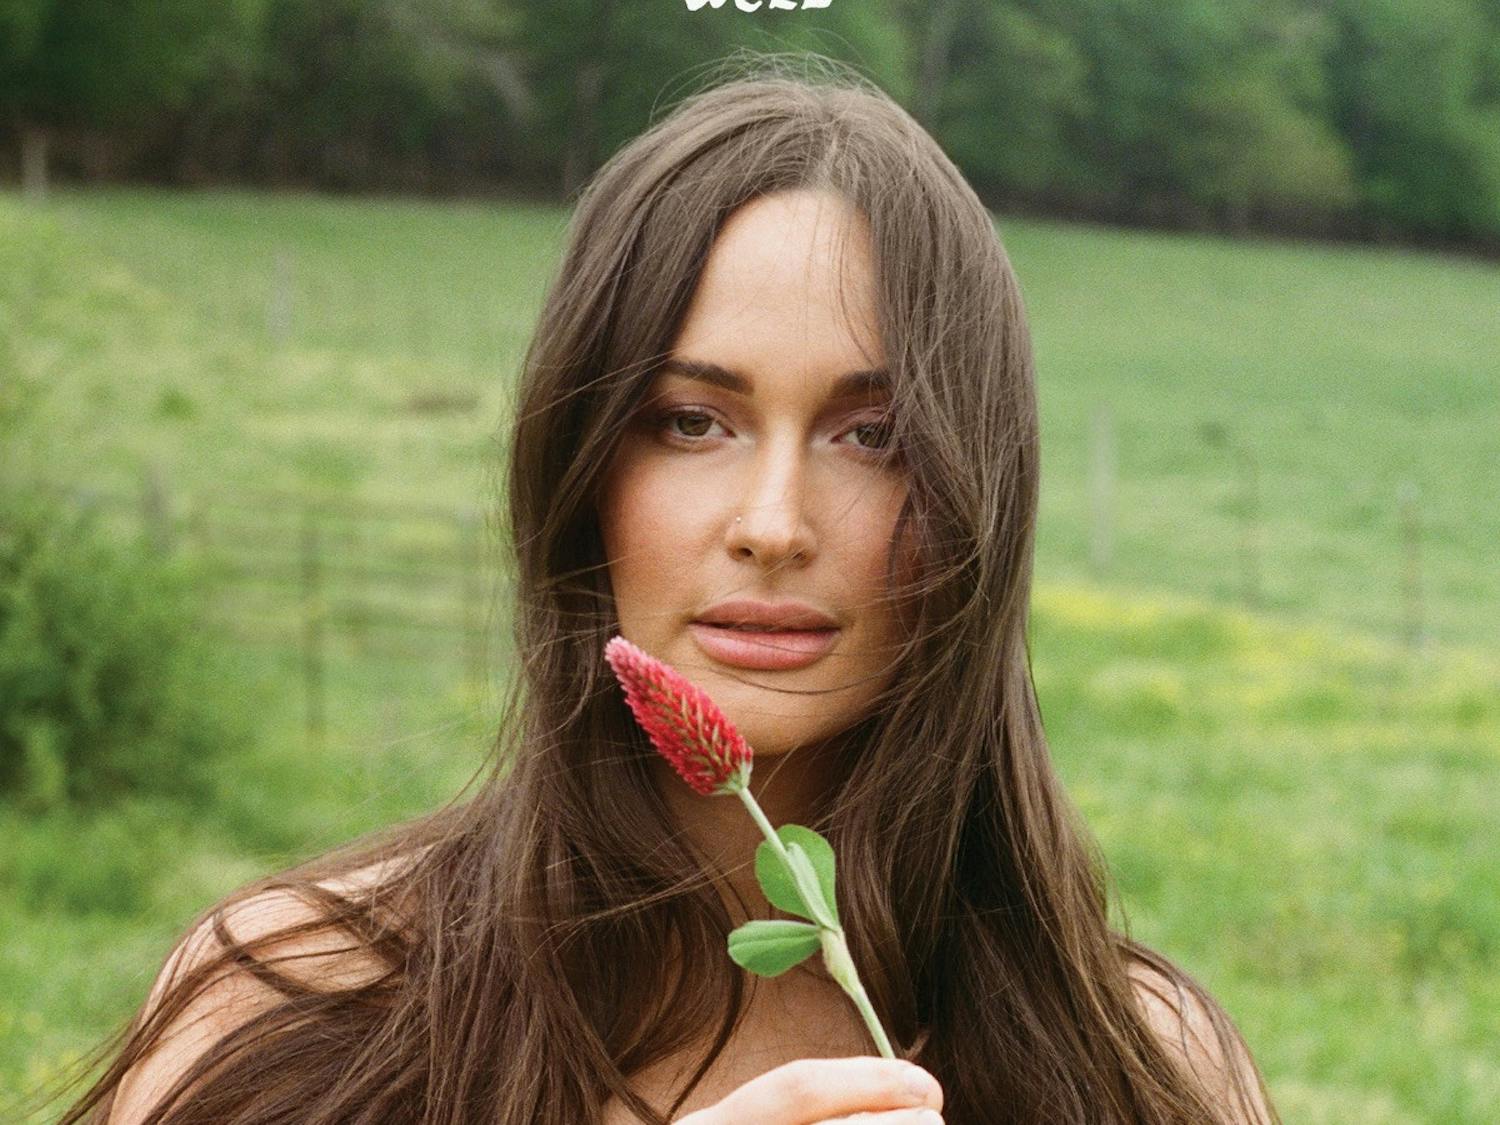 Kacey Musgraves&#x27; most recent album, “Deeper Well,” offers her listeners insight into her personal growth and experiences as she navigates through life. (Courtesy of Apple Music)